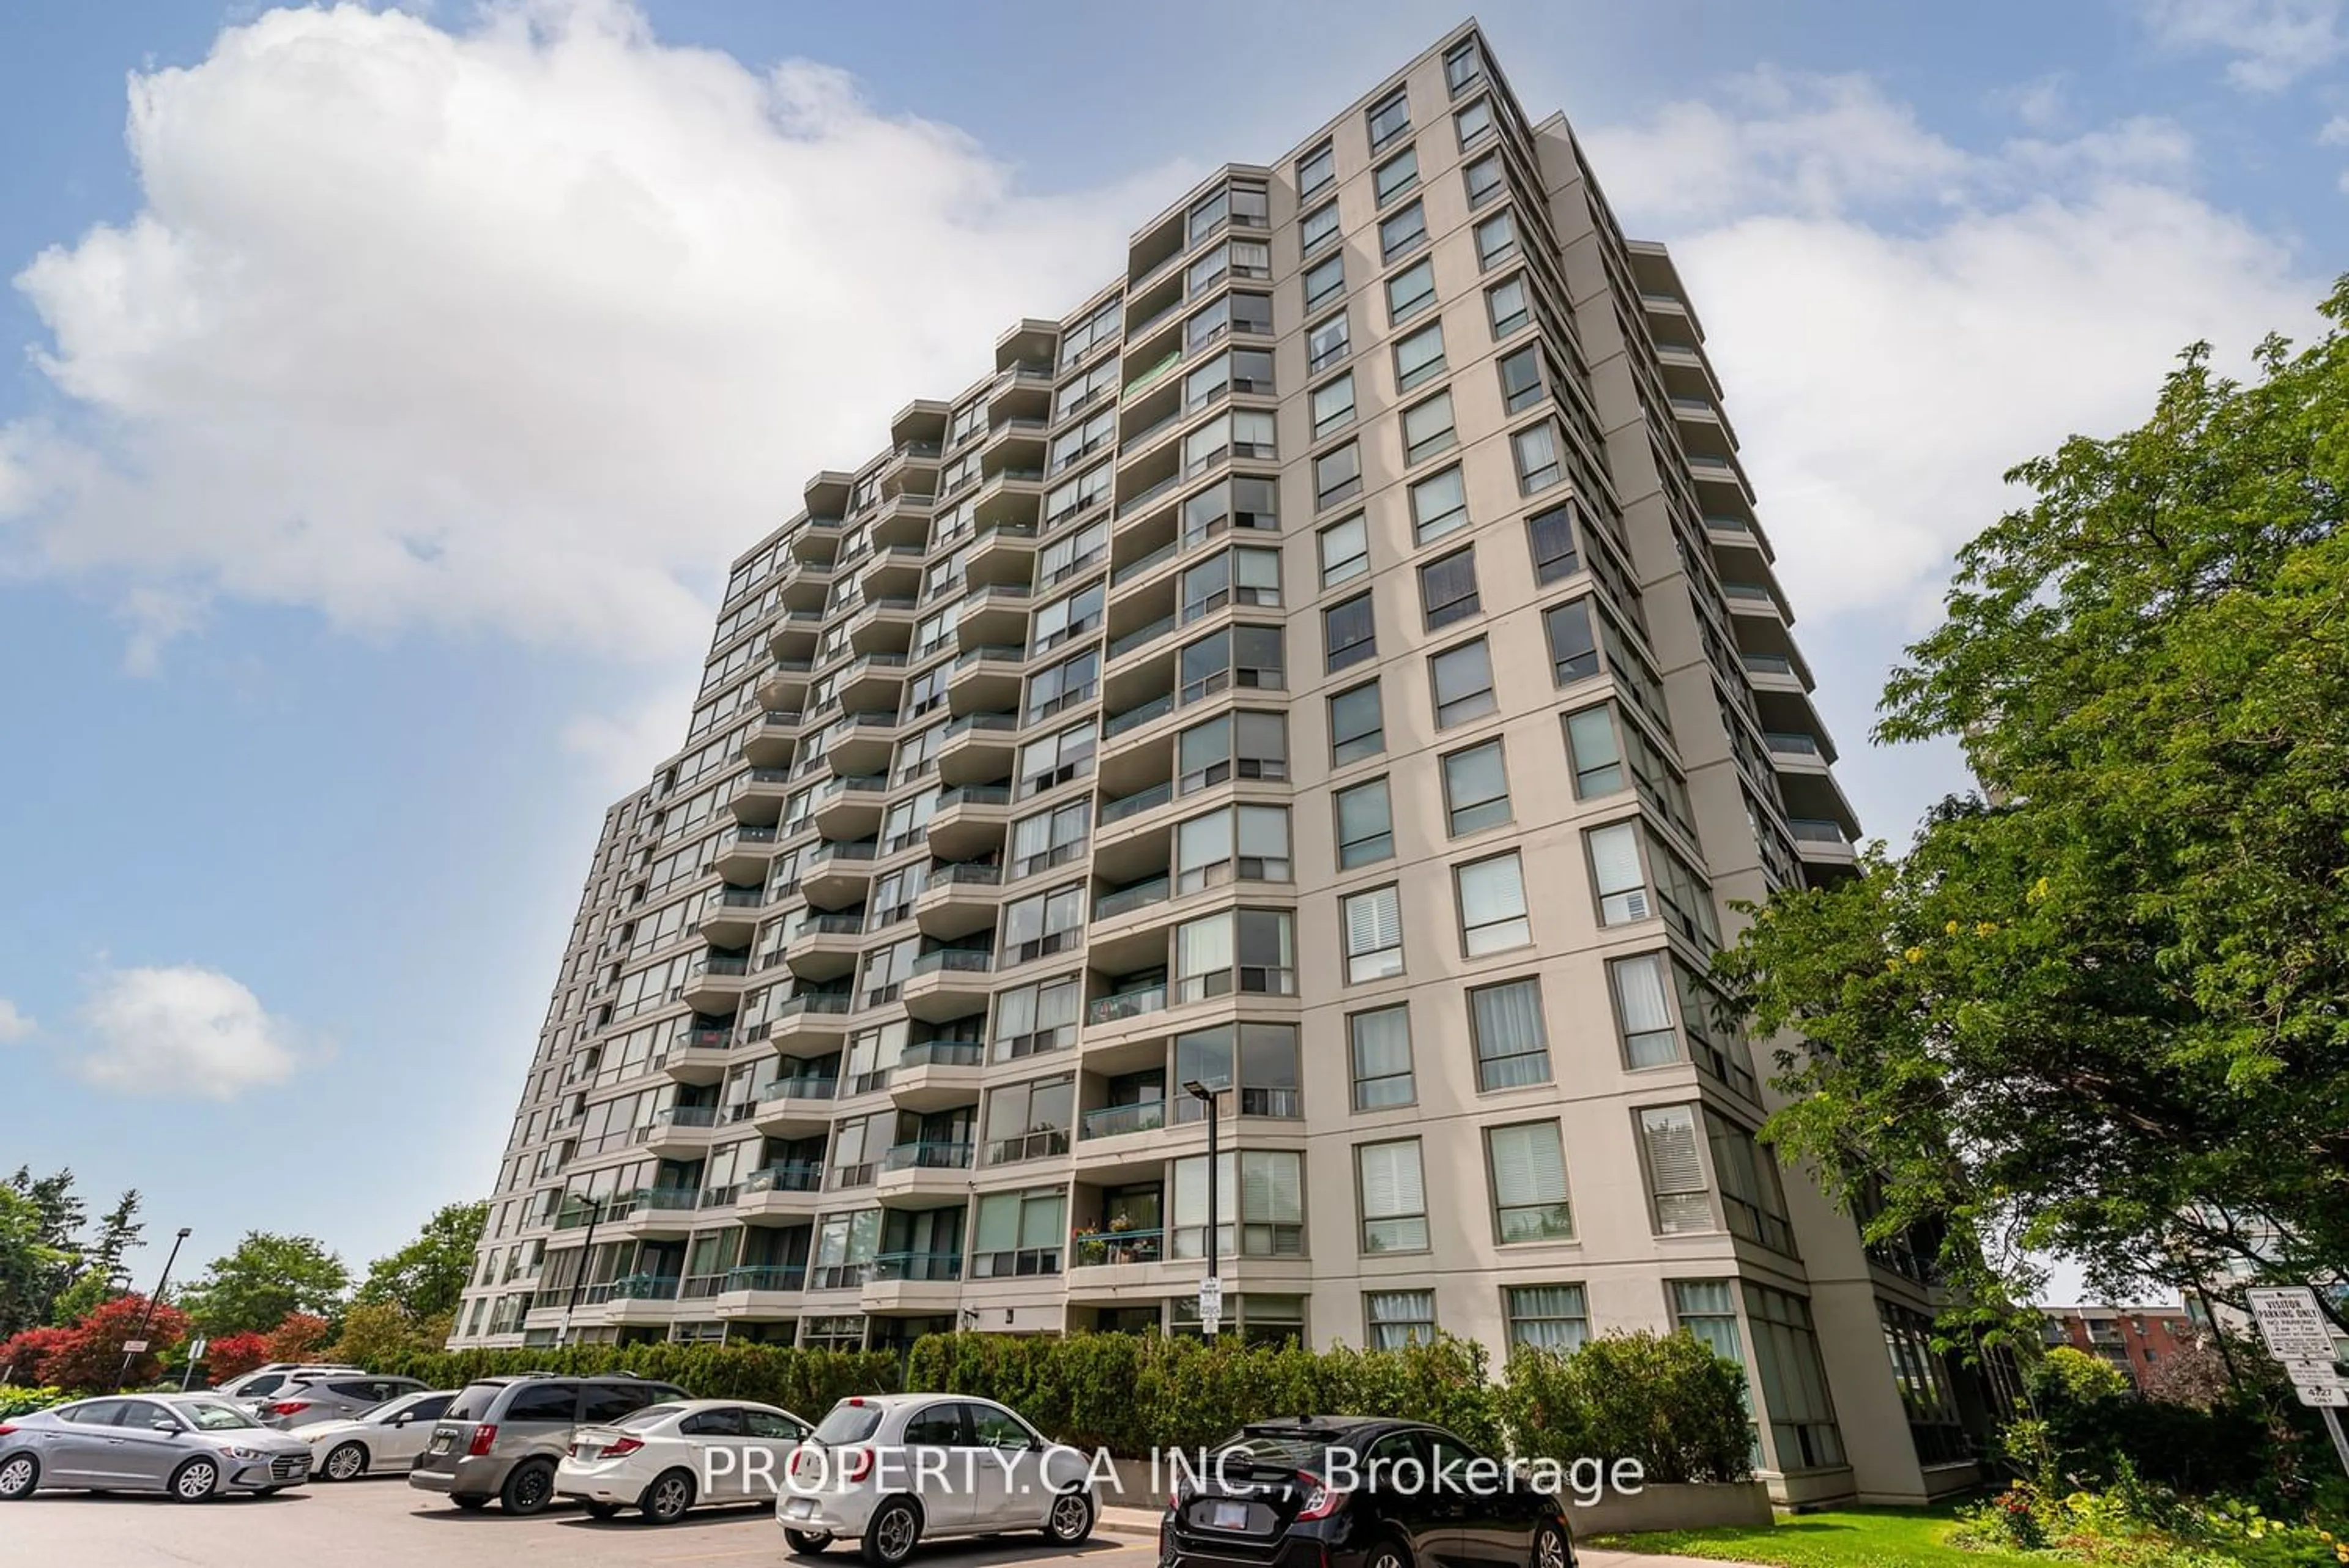 A pic from exterior of the house or condo for 4727 Sheppard Ave #608, Toronto Ontario M1S 5B3